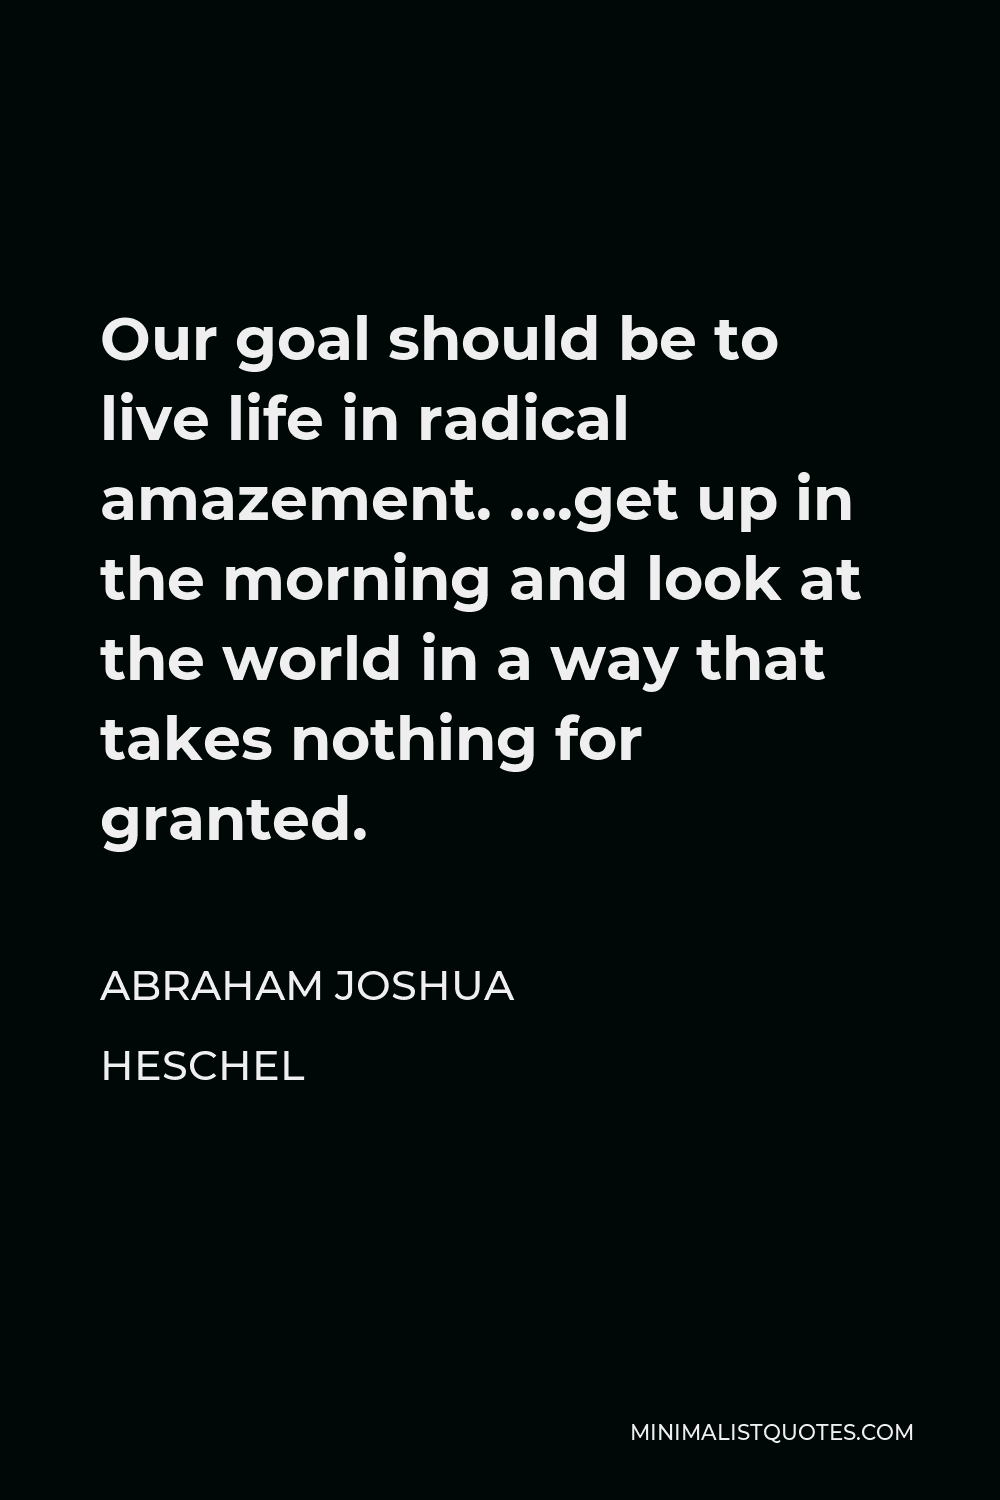 Abraham Joshua Heschel Quote - Our goal should be to live life in radical amazement. ….get up in the morning and look at the world in a way that takes nothing for granted.